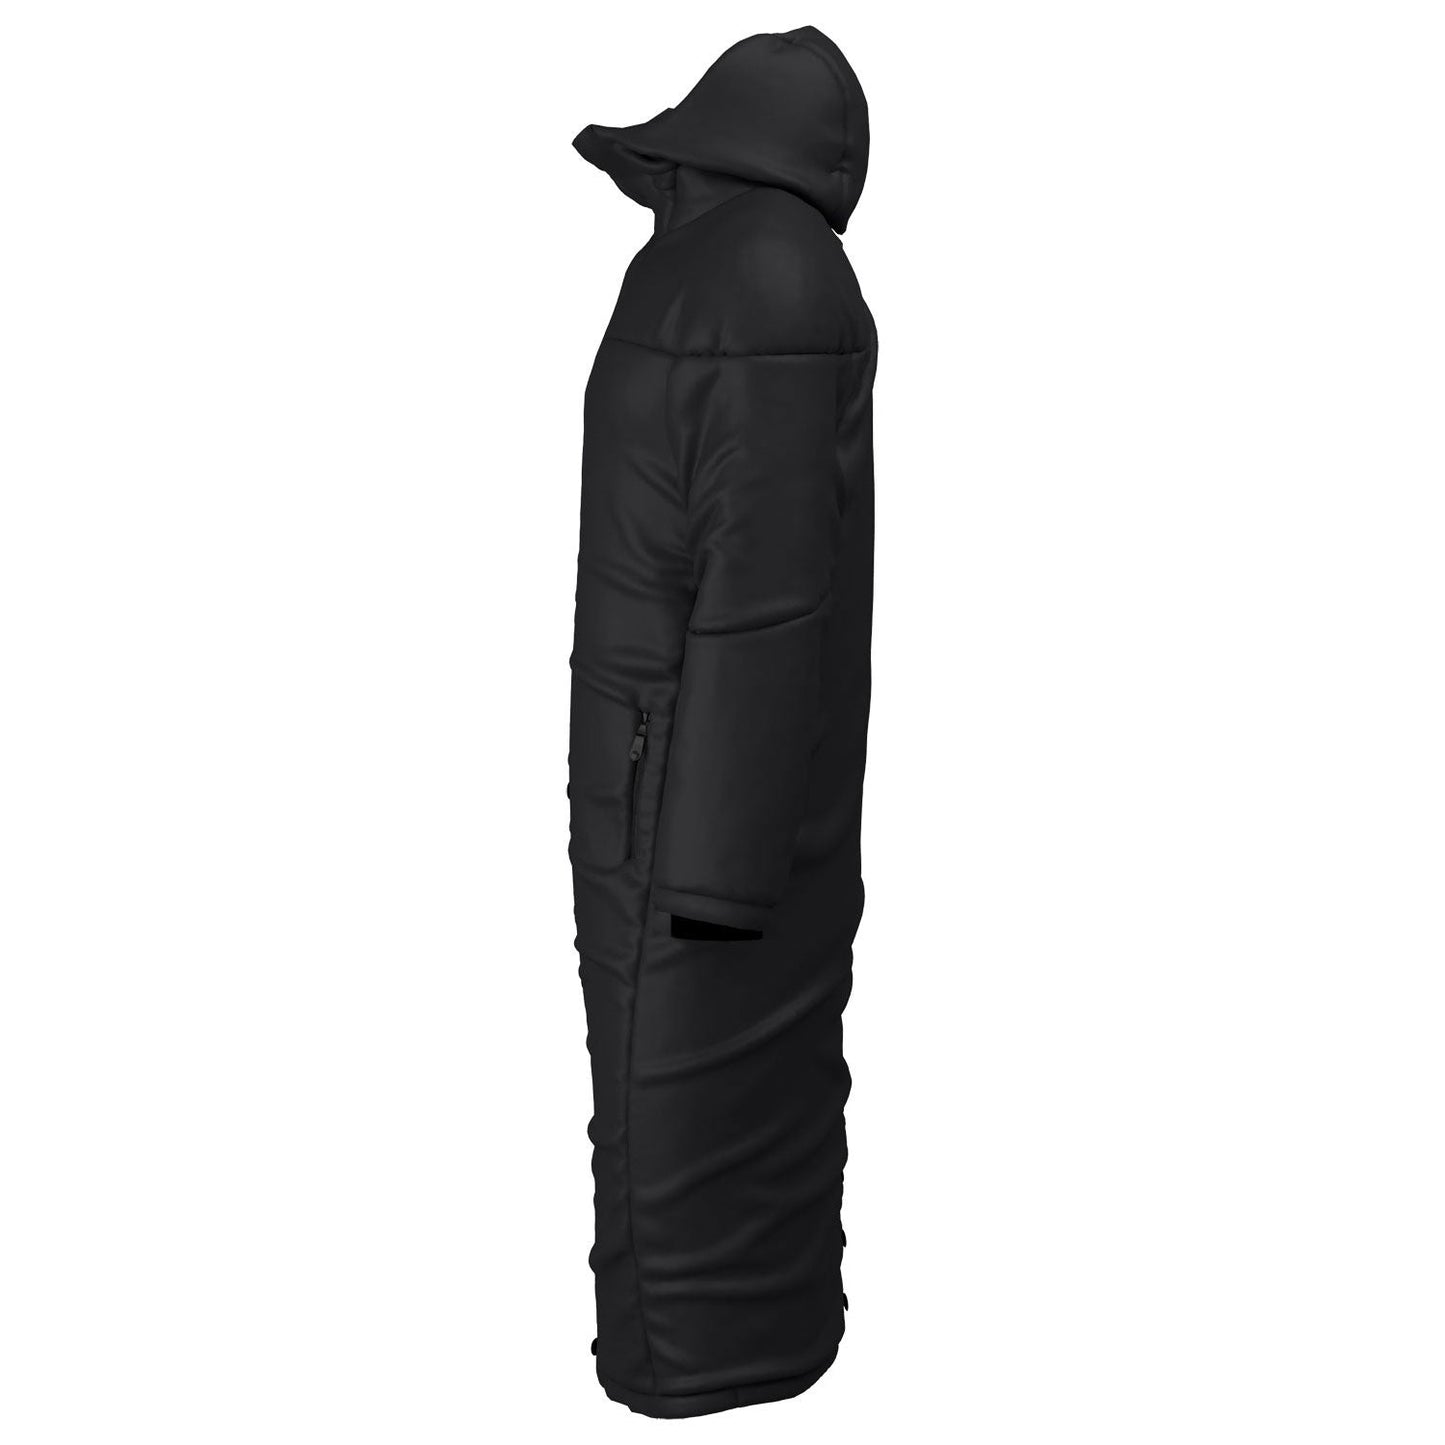 Plymouth ARC Contoured Thermal Sub Coat